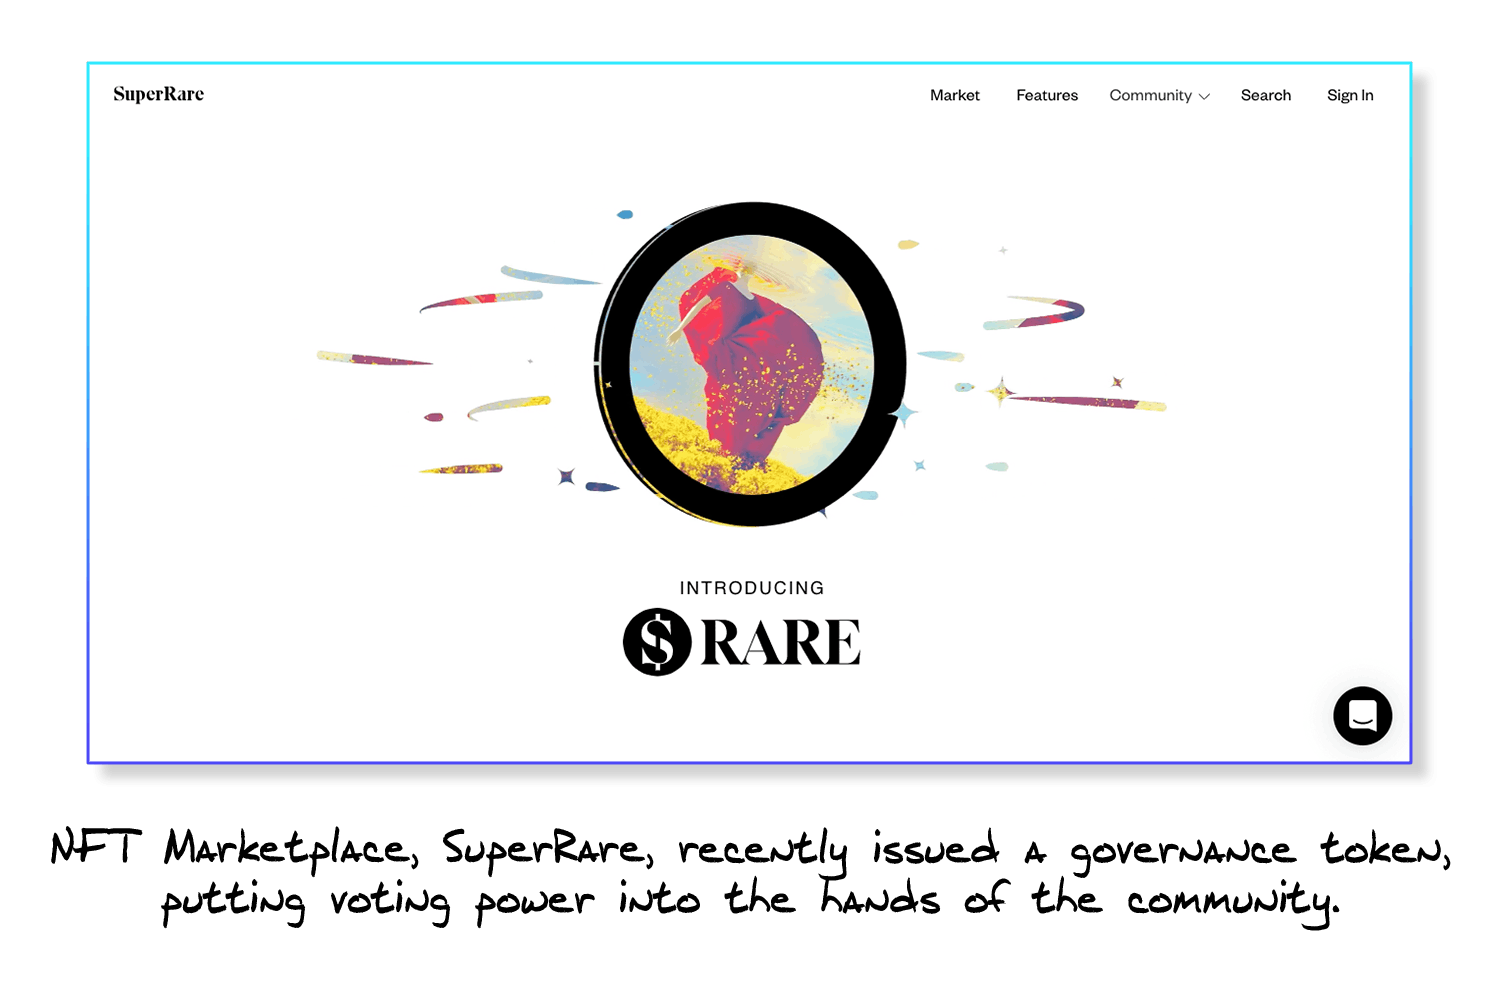 SuperRare Issues the $RARE Governance Token